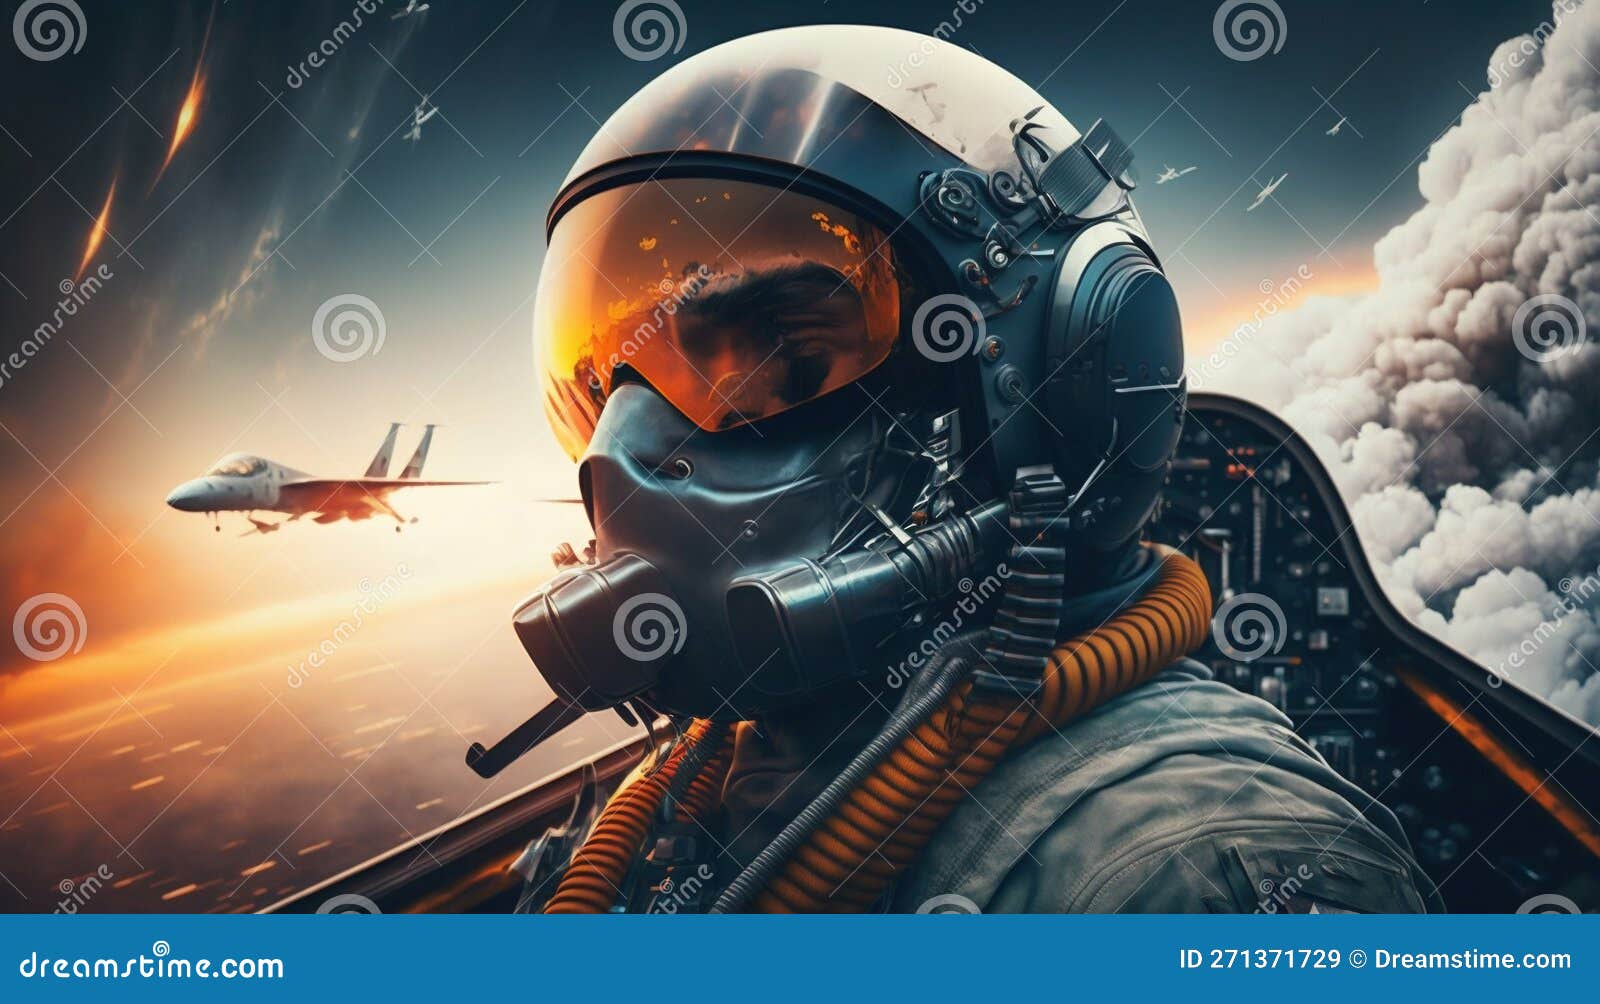 Wallpaper  sky fighter pilot gesture aerospace manufacturer airplane  jacket fighter aircraft military aircraft automotive design ground  attack aircraft aviation cg artwork jet aircraft personal protective  equipment video game software 